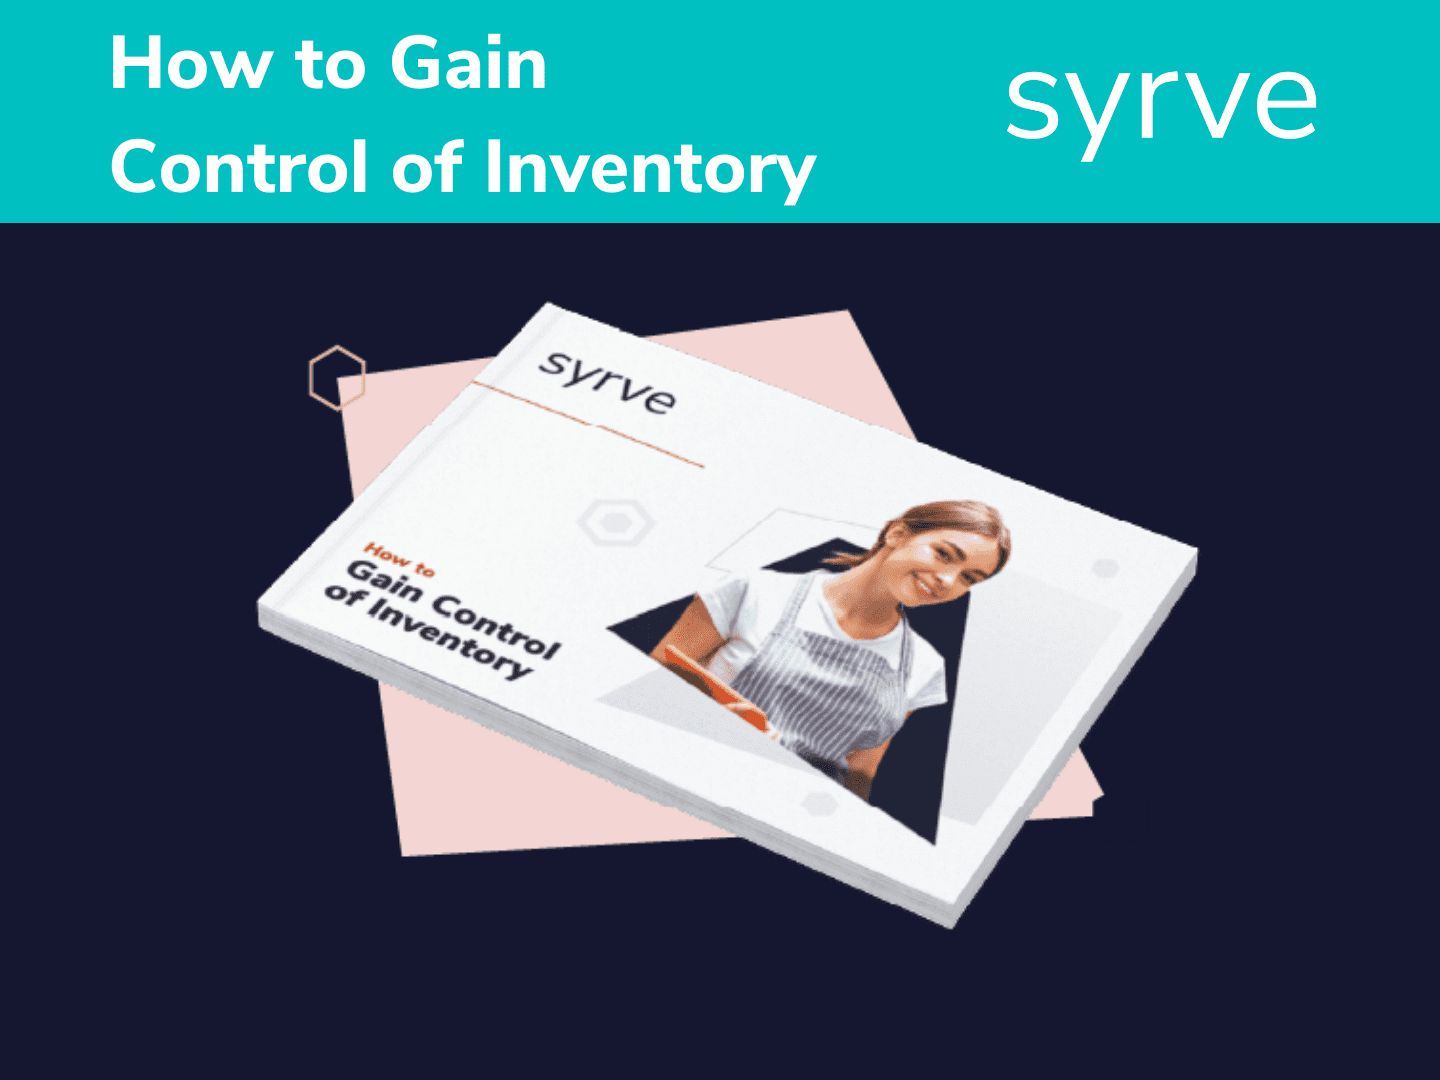 How to Gain Control of Inventory